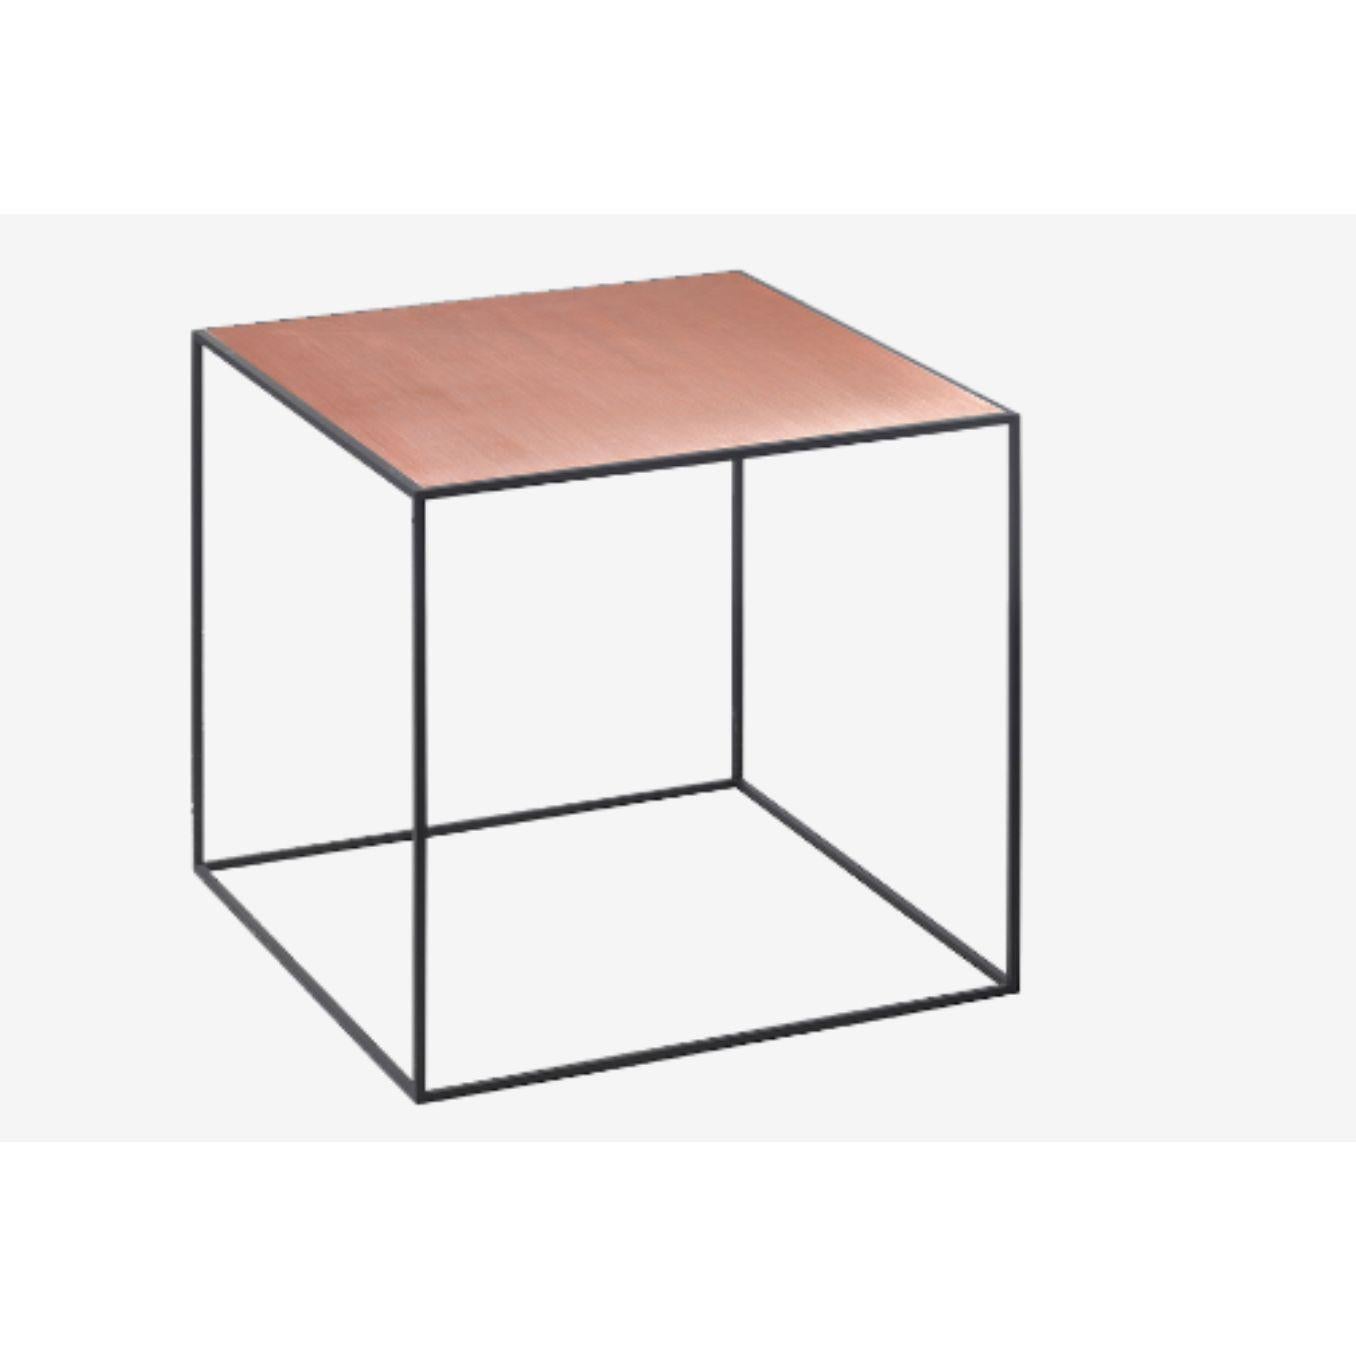 49 Copper twin table by Lassen.
Dimensions: W 49 x D 49 x H 0.5 cm.
Materials: finér, melamin, melamin, melamine, metal, veneer, oak
Also available in different colours and dimensions. 

With an uncomplicated simplicity and a fond reference to